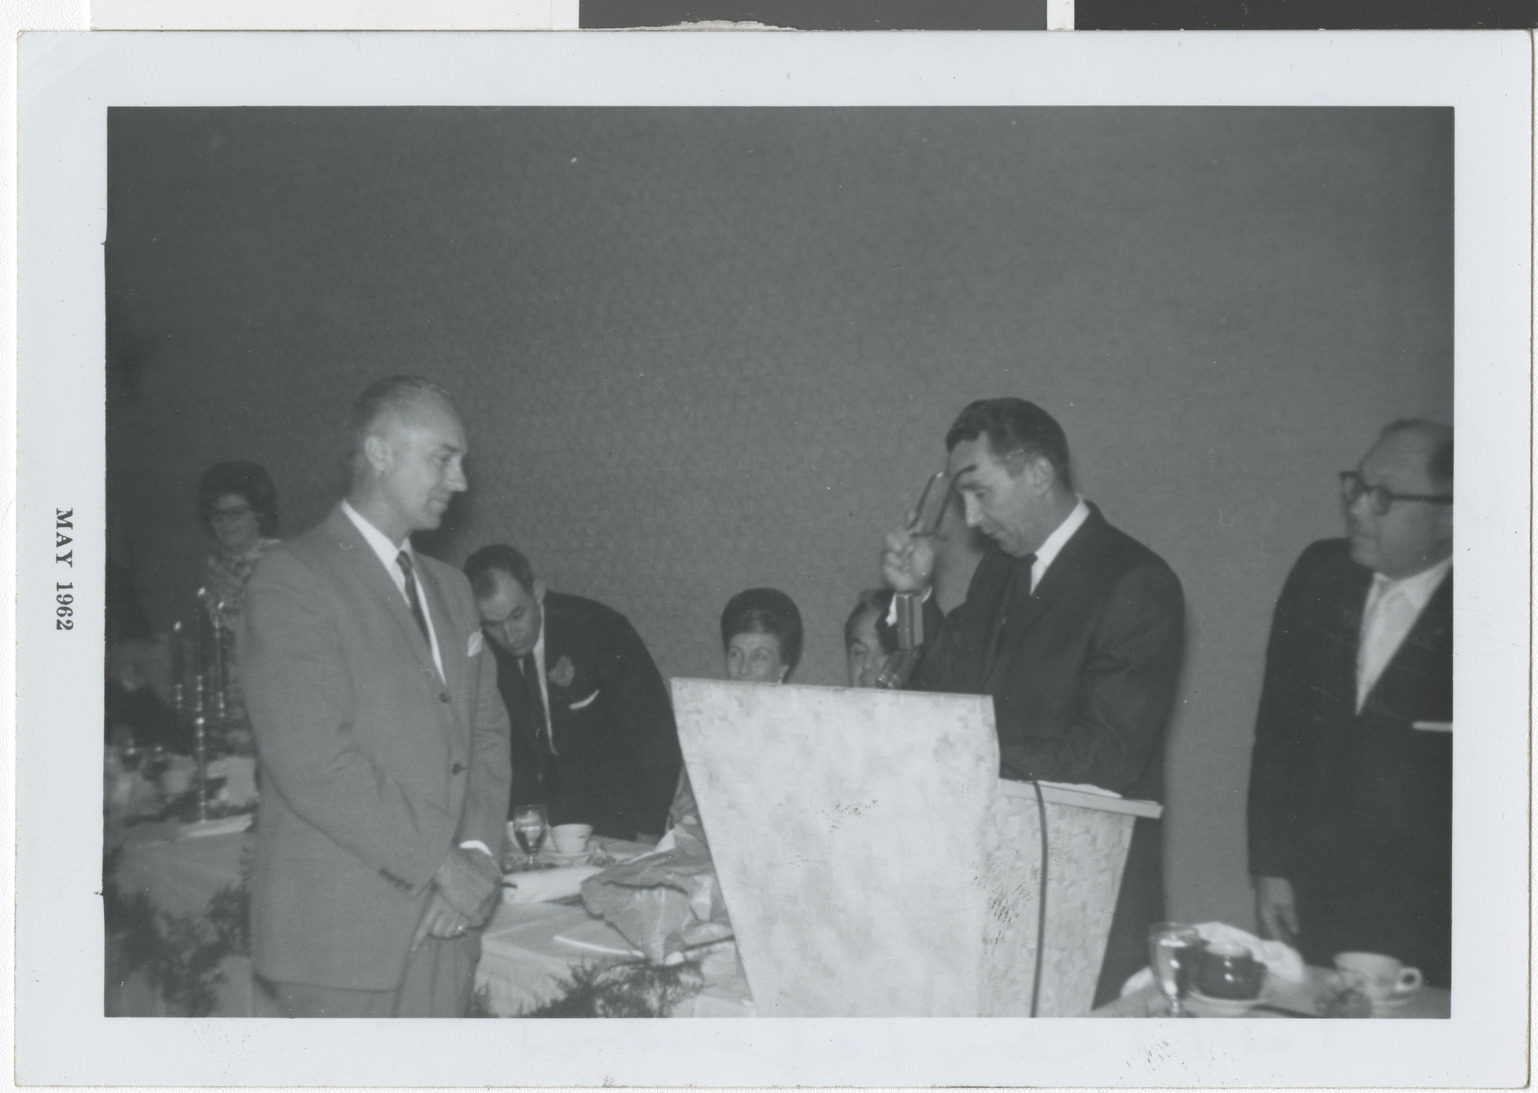 Photograph of Dave Goldwater reading plaque presented to E. Parry Thomas for Man of the Year award, B'nai B'rith installation, May 1962